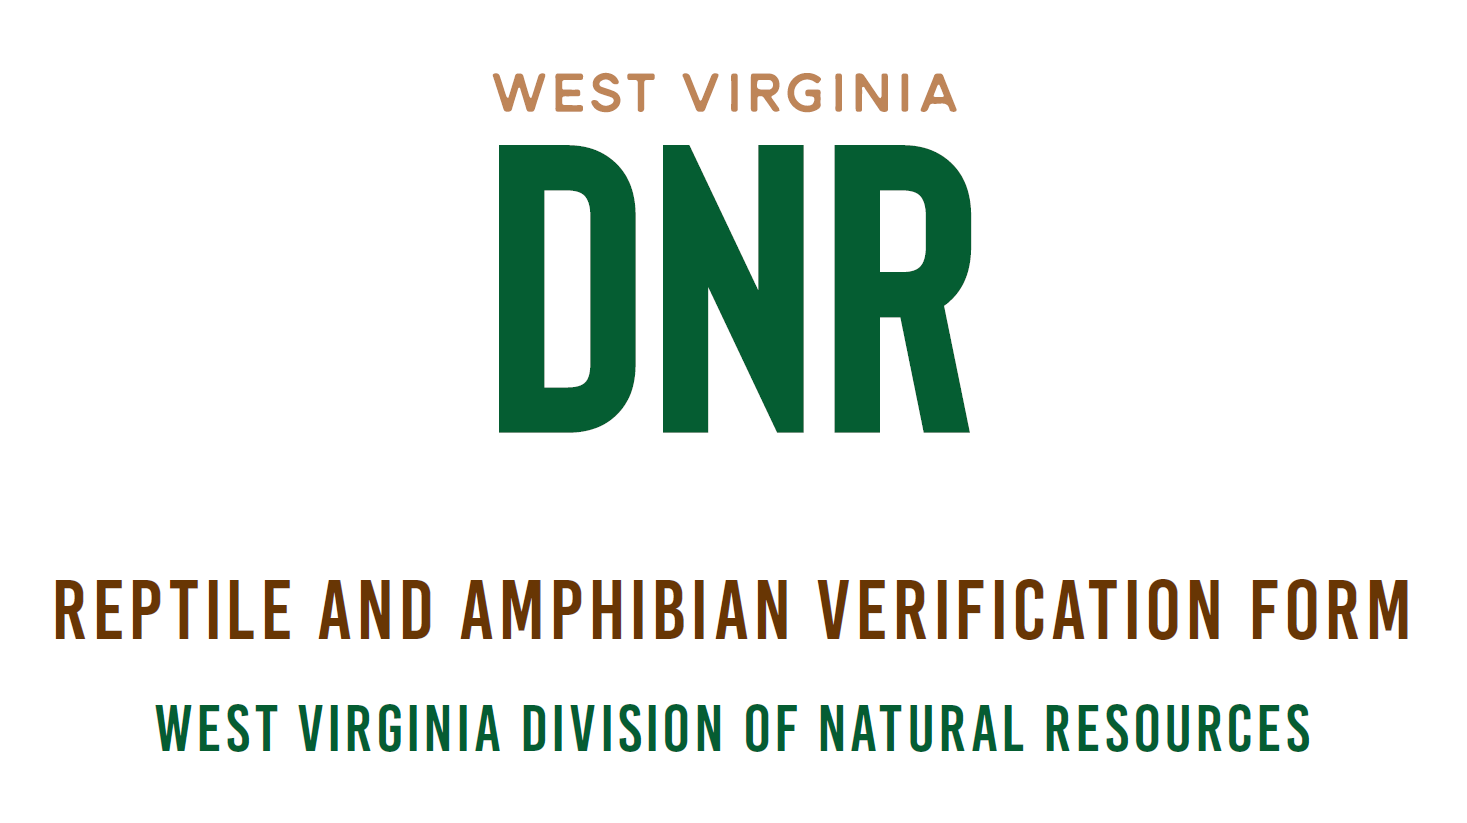 Reptile and Amphibian Verification Form - West Virginia Division of Natural Resources